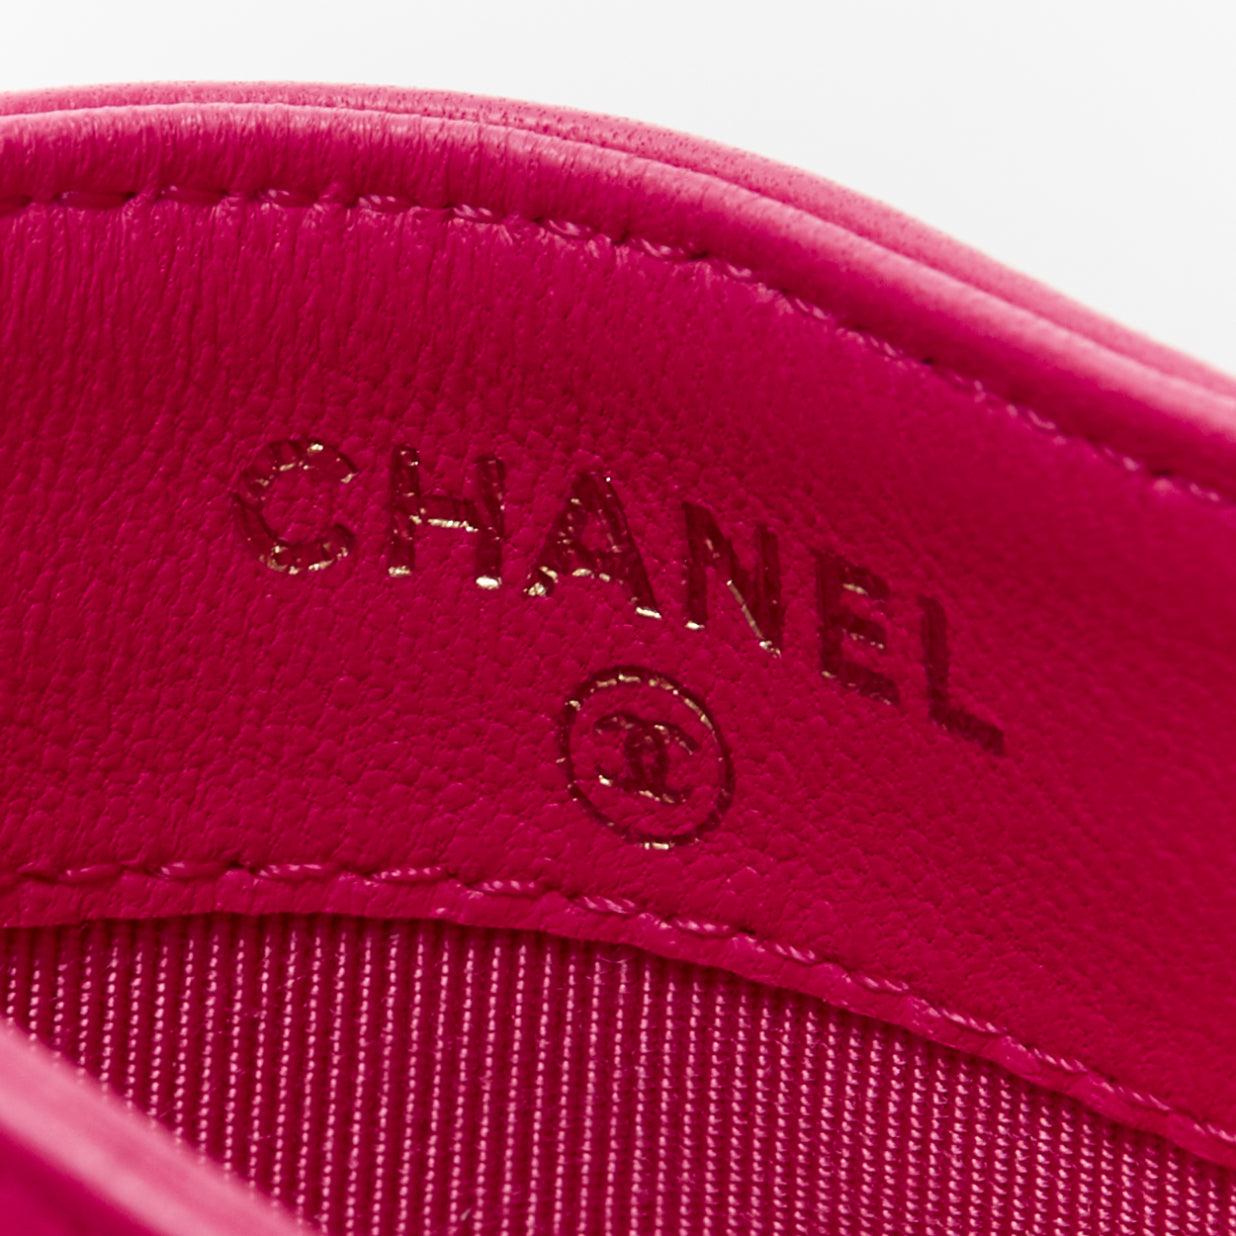 CHANEL bright pink smooth leather CC logo quilted cardholder For Sale 2